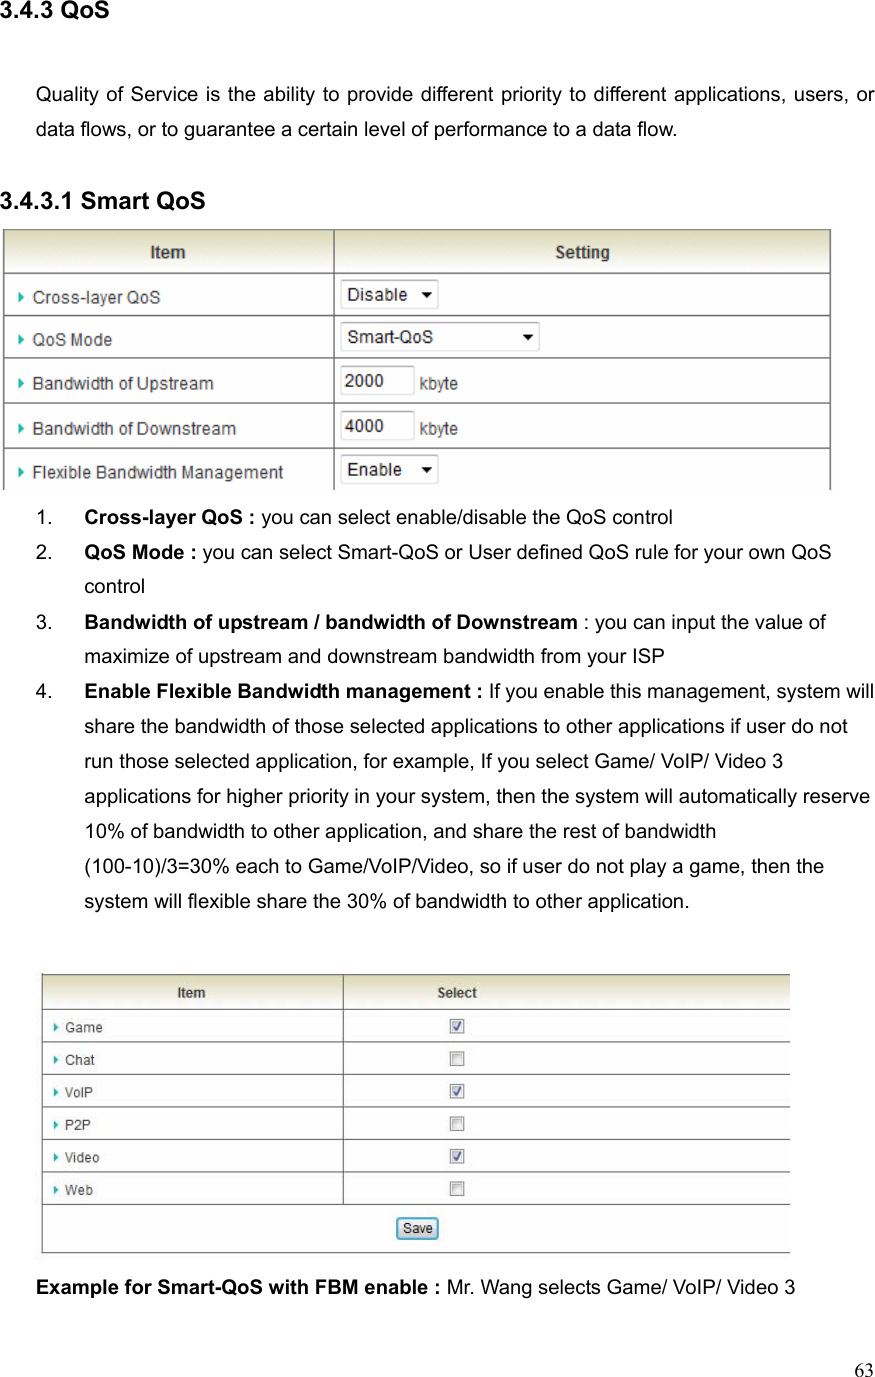  633.4.3 QoS   Quality of Service is the ability to provide different priority to different applications, users, or data flows, or to guarantee a certain level of performance to a data flow.  3.4.3.1 Smart QoS  1.  Cross-layer QoS : you can select enable/disable the QoS control 2.  QoS Mode : you can select Smart-QoS or User defined QoS rule for your own QoS control 3.  Bandwidth of upstream / bandwidth of Downstream : you can input the value of maximize of upstream and downstream bandwidth from your ISP 4.  Enable Flexible Bandwidth management : If you enable this management, system will share the bandwidth of those selected applications to other applications if user do not run those selected application, for example, If you select Game/ VoIP/ Video 3 applications for higher priority in your system, then the system will automatically reserve 10% of bandwidth to other application, and share the rest of bandwidth   (100-10)/3=30% each to Game/VoIP/Video, so if user do not play a game, then the system will flexible share the 30% of bandwidth to other application.     Example for Smart-QoS with FBM enable : Mr. Wang selects Game/ VoIP/ Video 3 